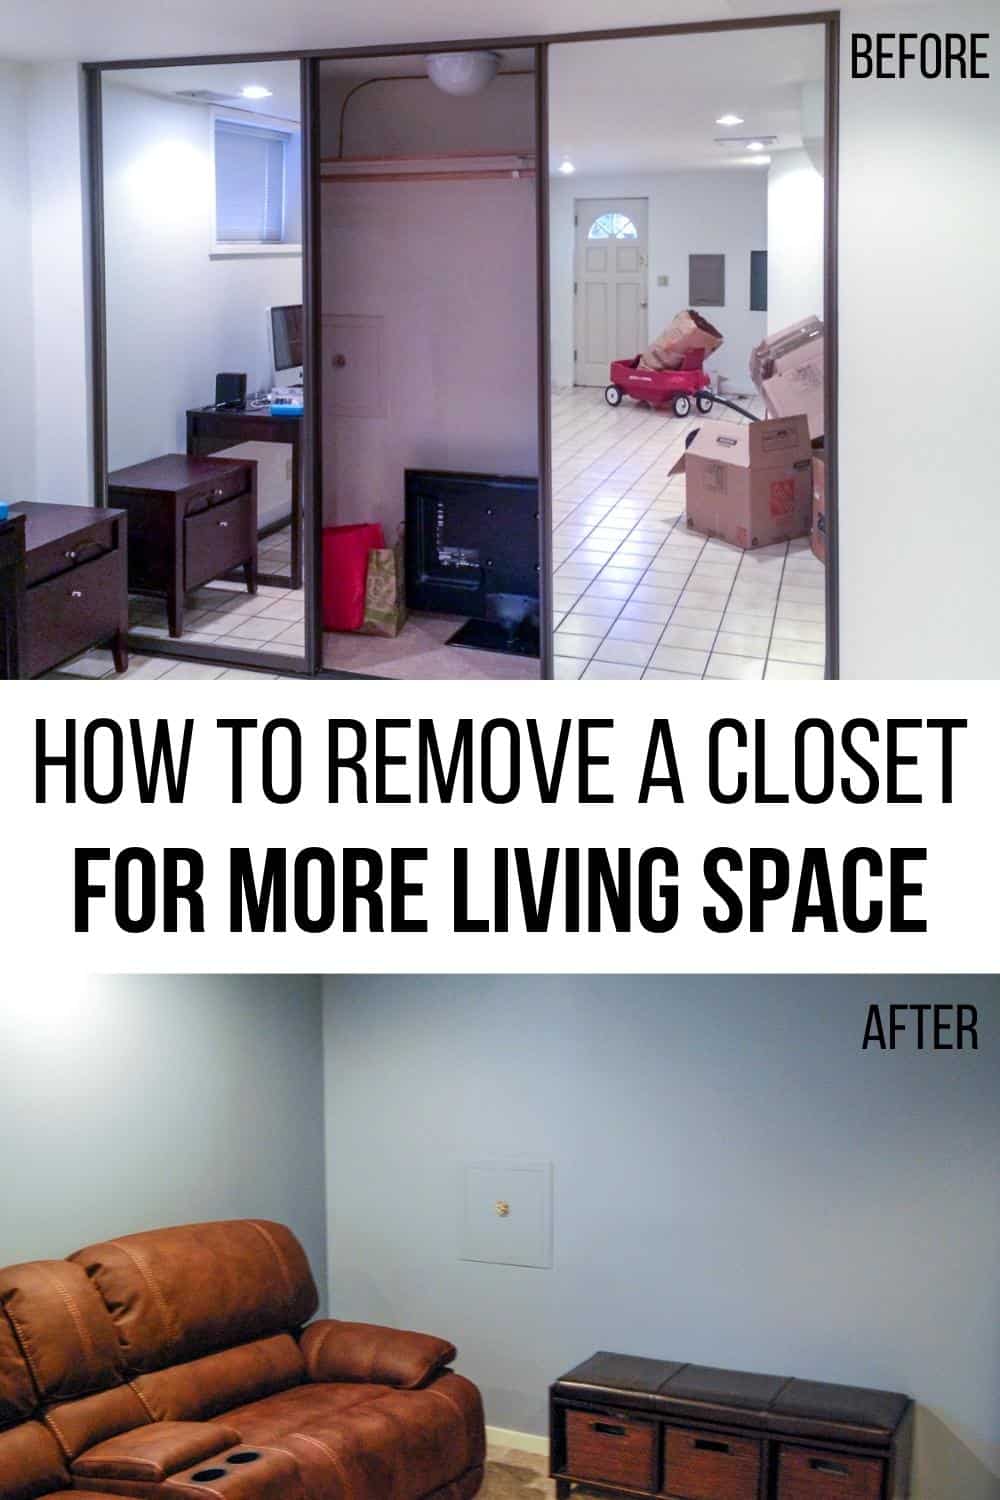 how to remove a closet with before and after images